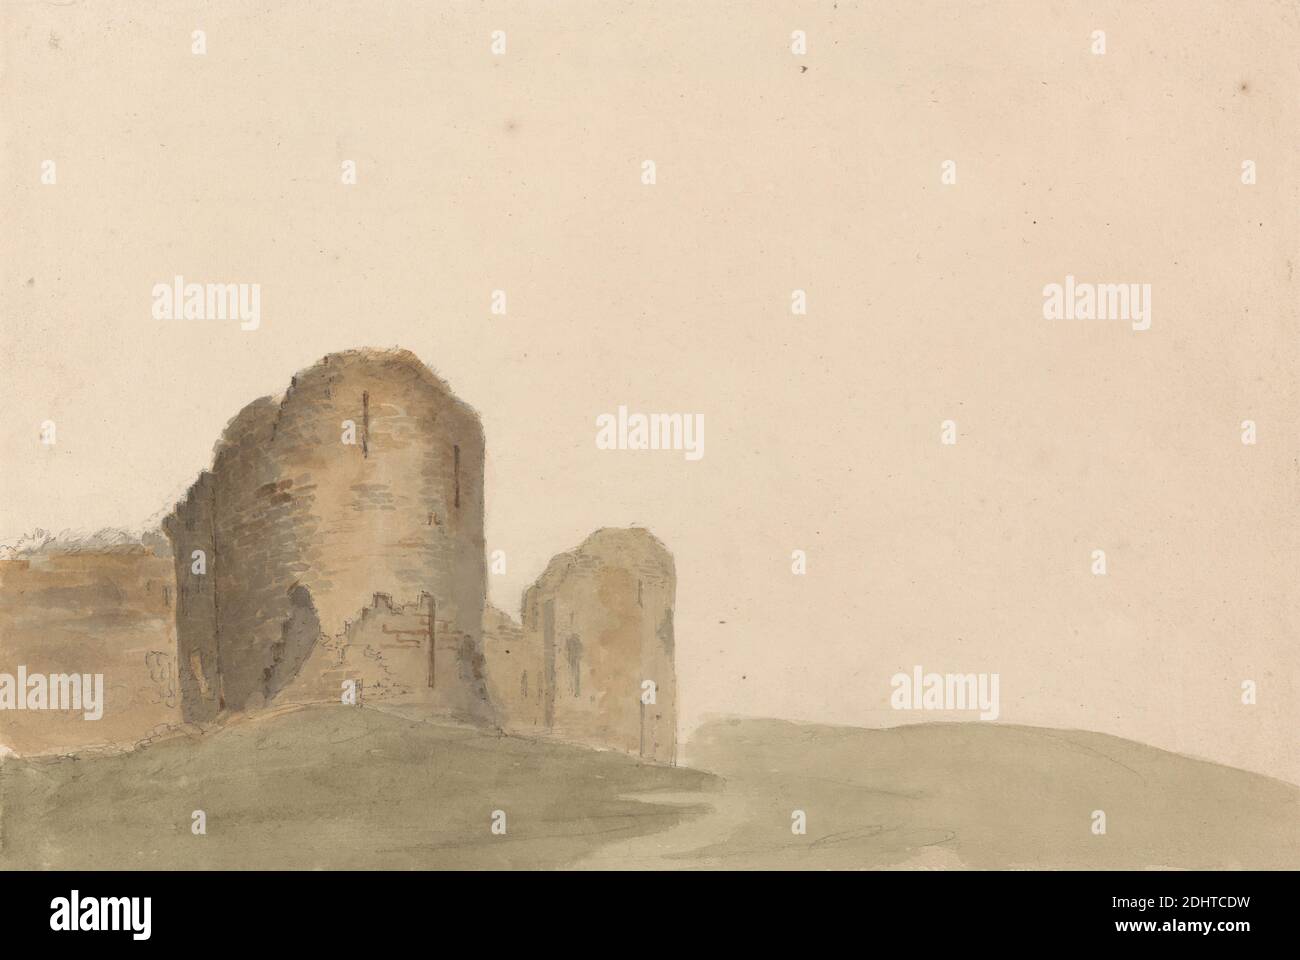 Pevensey Castle, Sussex, James Moore, 1762–1799, British, after Thomas Girtin, 1775–1802, British, undated, Watercolor and graphite on medium, slightly textured, cream wove paper, Sheet: 6 1/2 × 9 9/16 inches (16.5 × 24.3 cm), architectural subject, arrow loops, battlements, castle, loopholes, ruins, stonework, towers (building divisions), walls, East Sussex, England, Europe, Pevensey, Pevensey Castle, United Kingdom Stock Photo